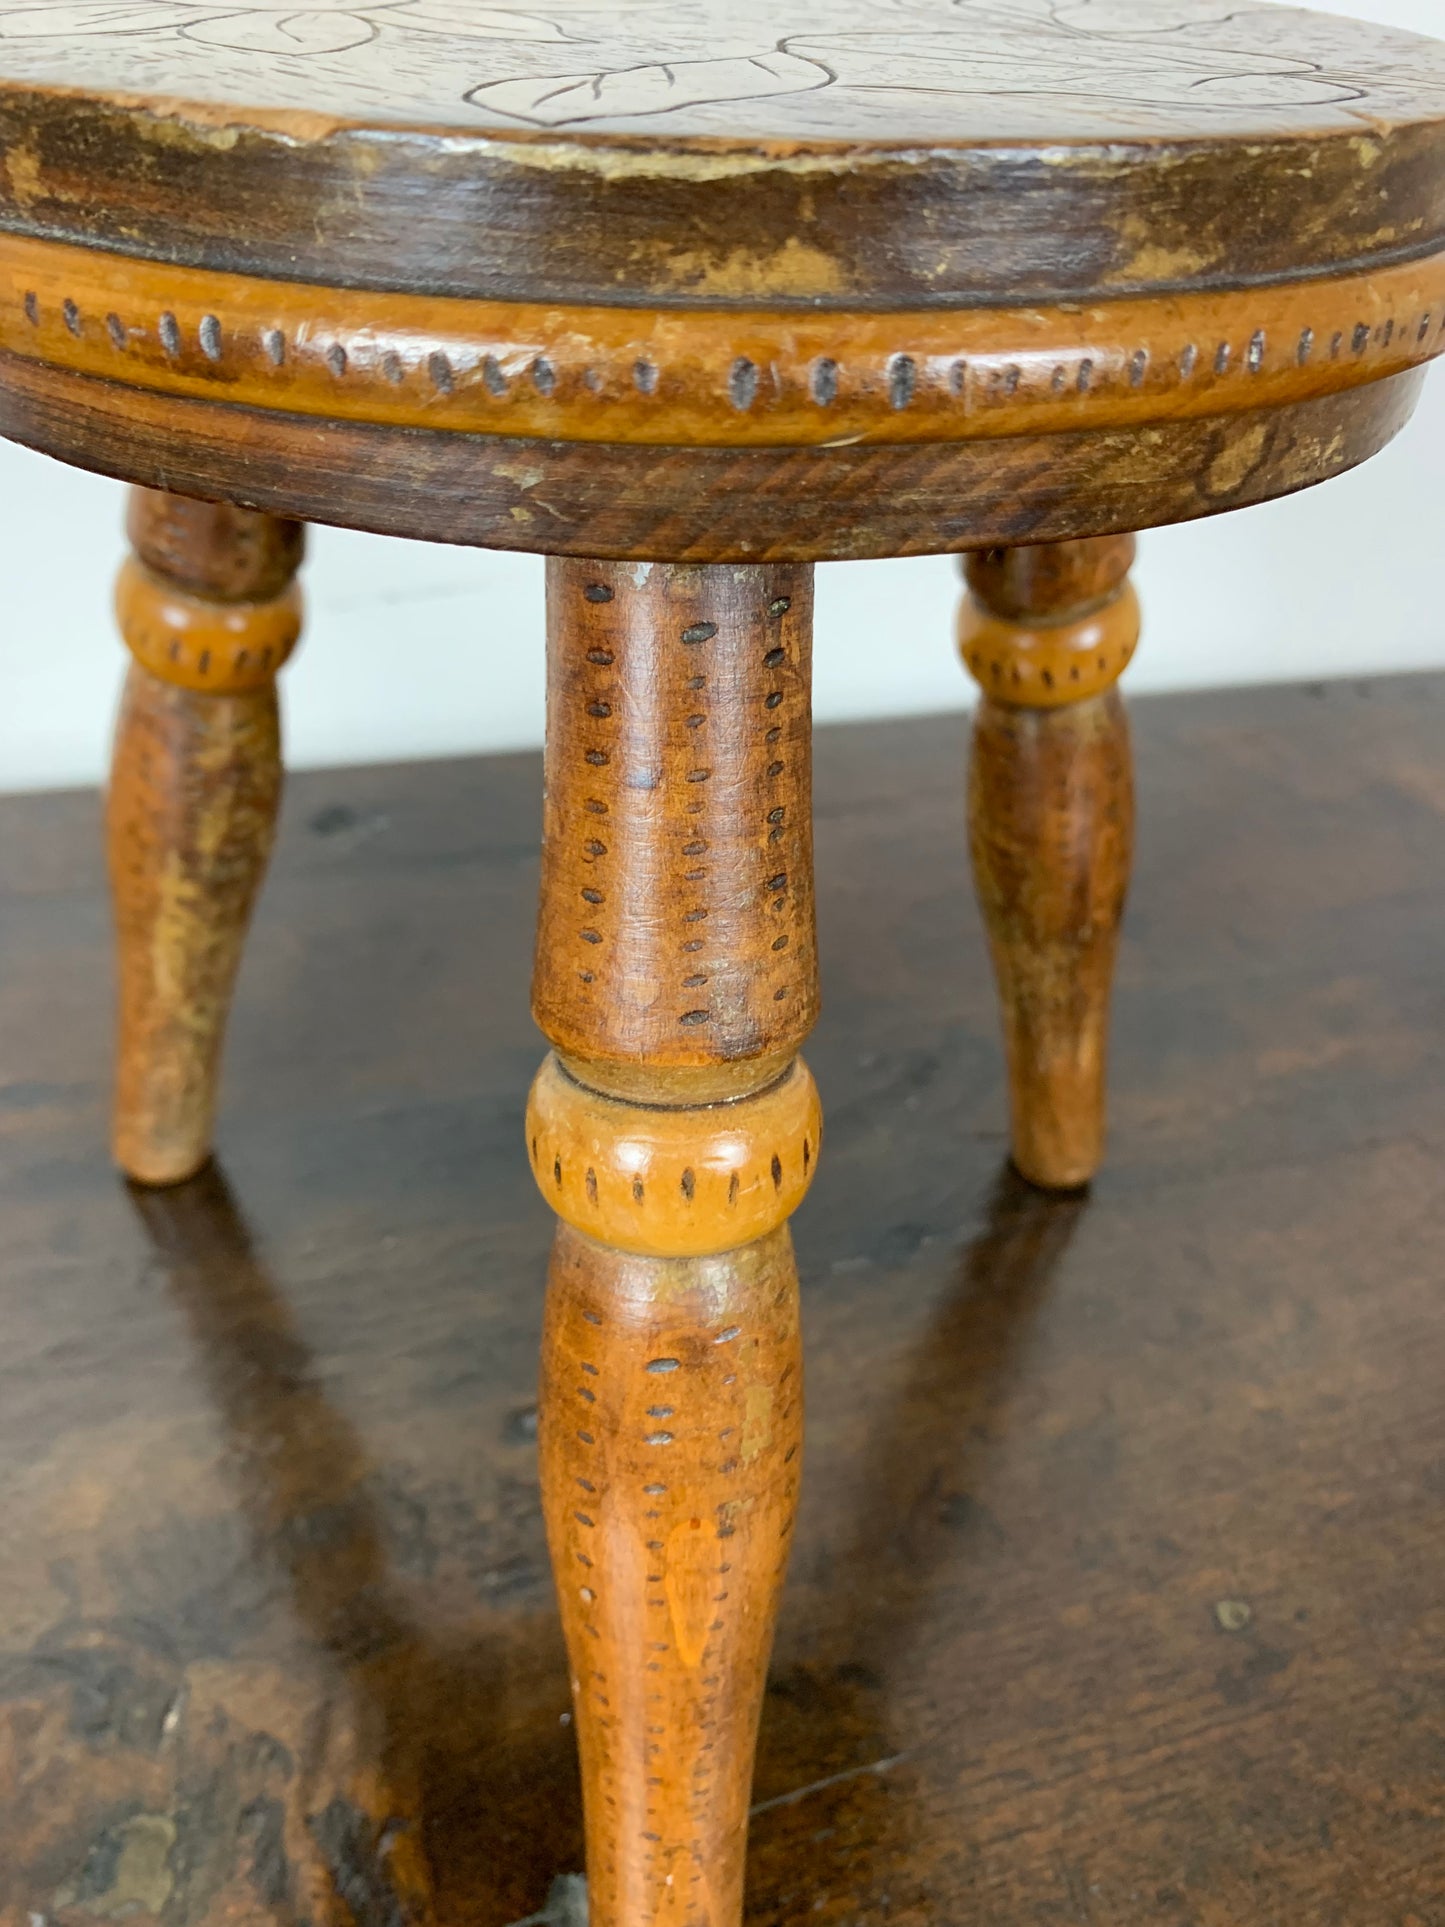 A Floral Masterpiece: Antique Carved Flower Stool